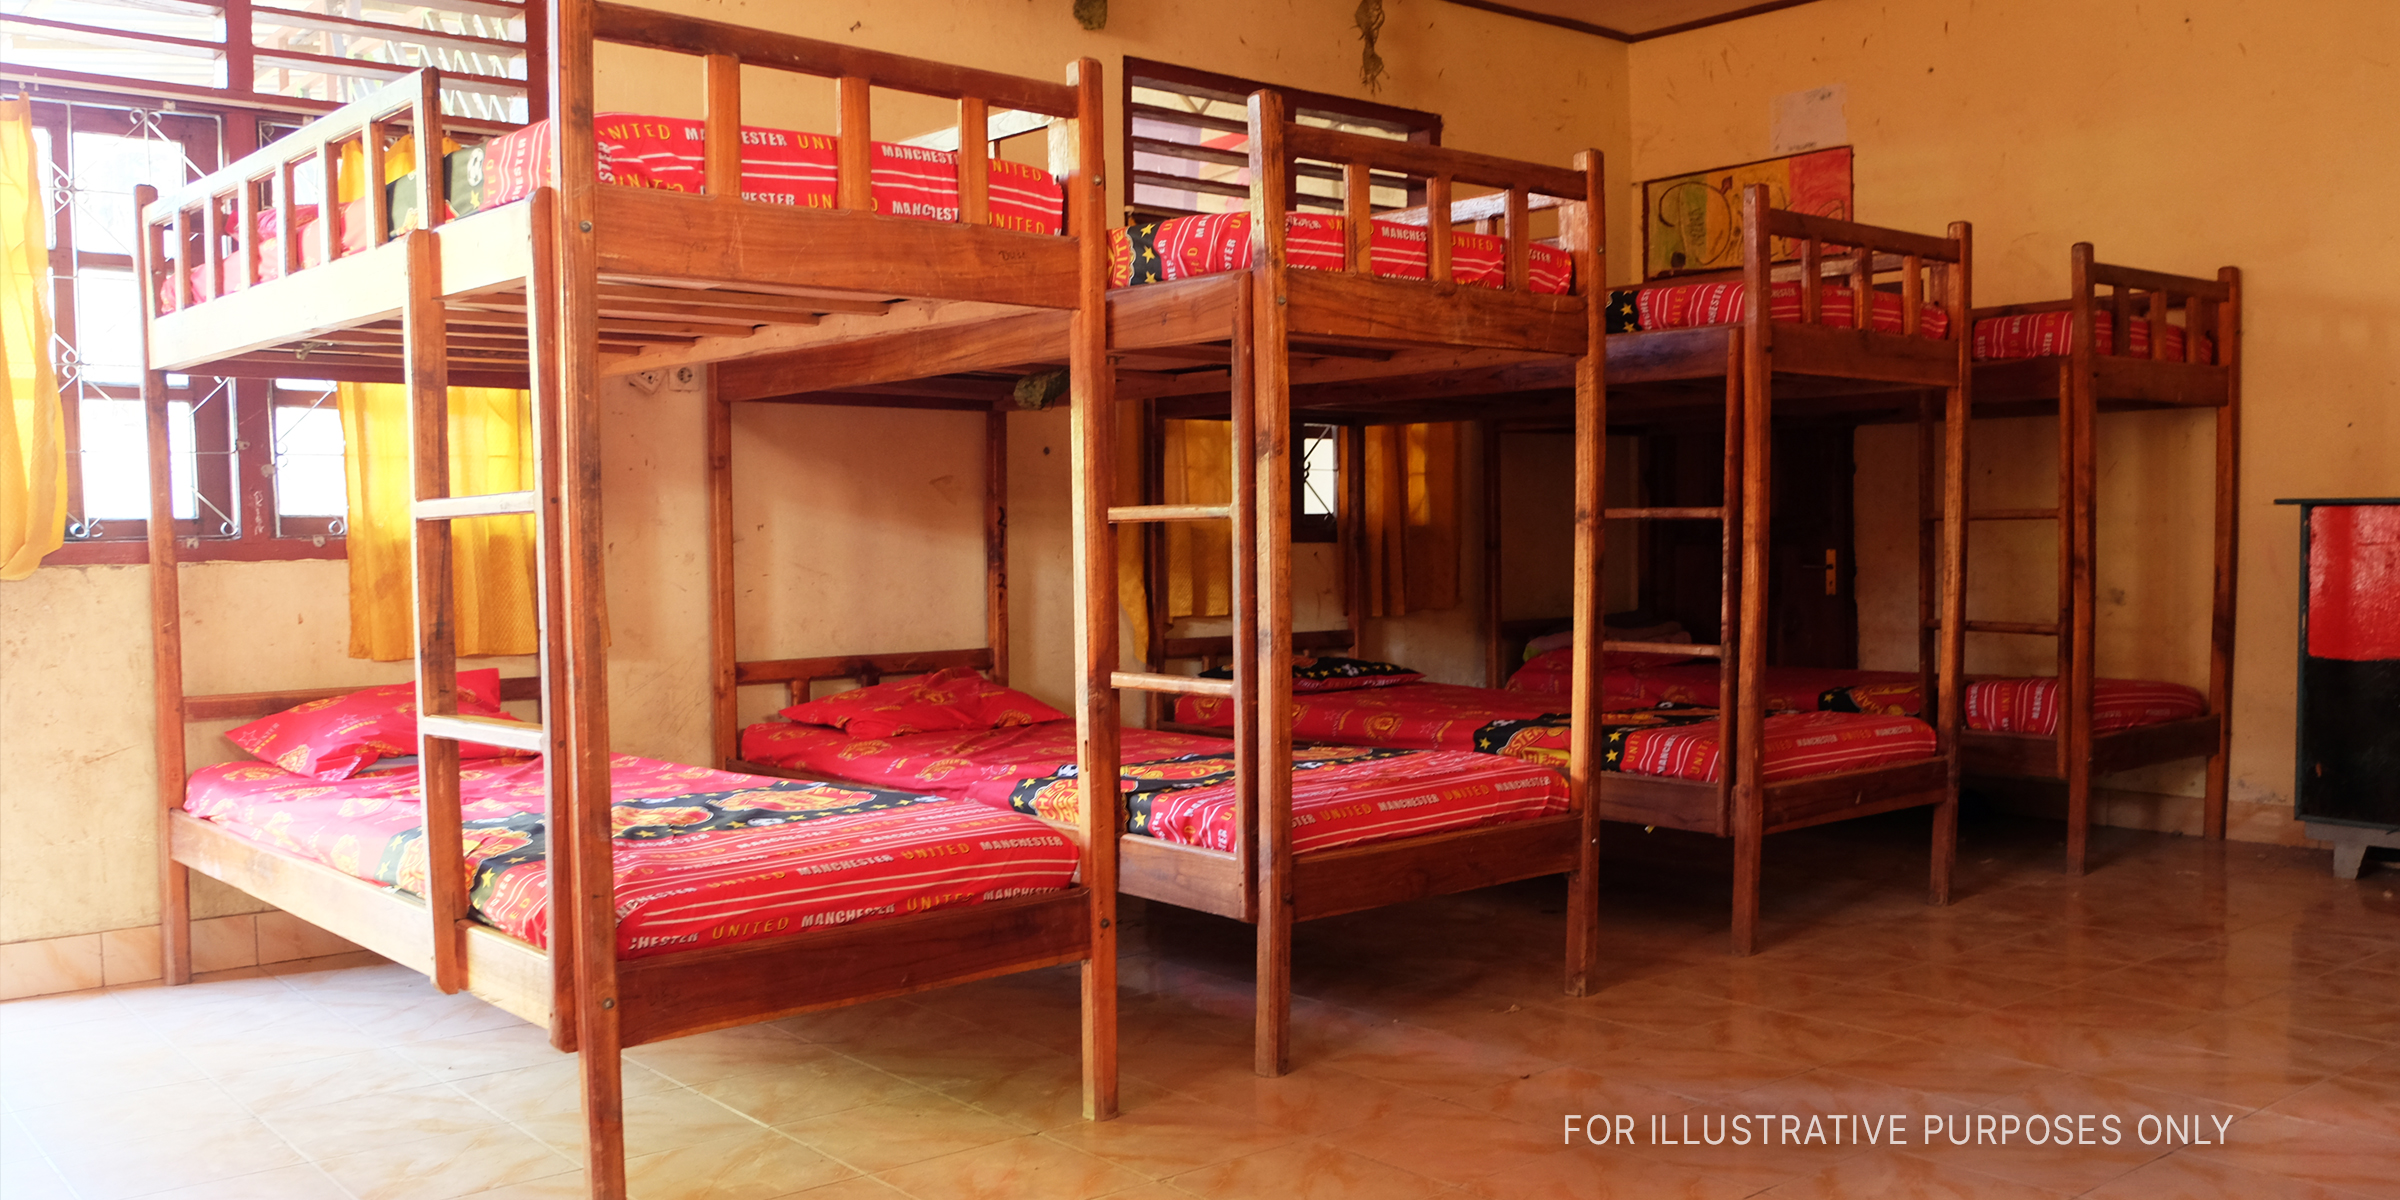 Several bunk beds in a room. | Source: Shutterstock